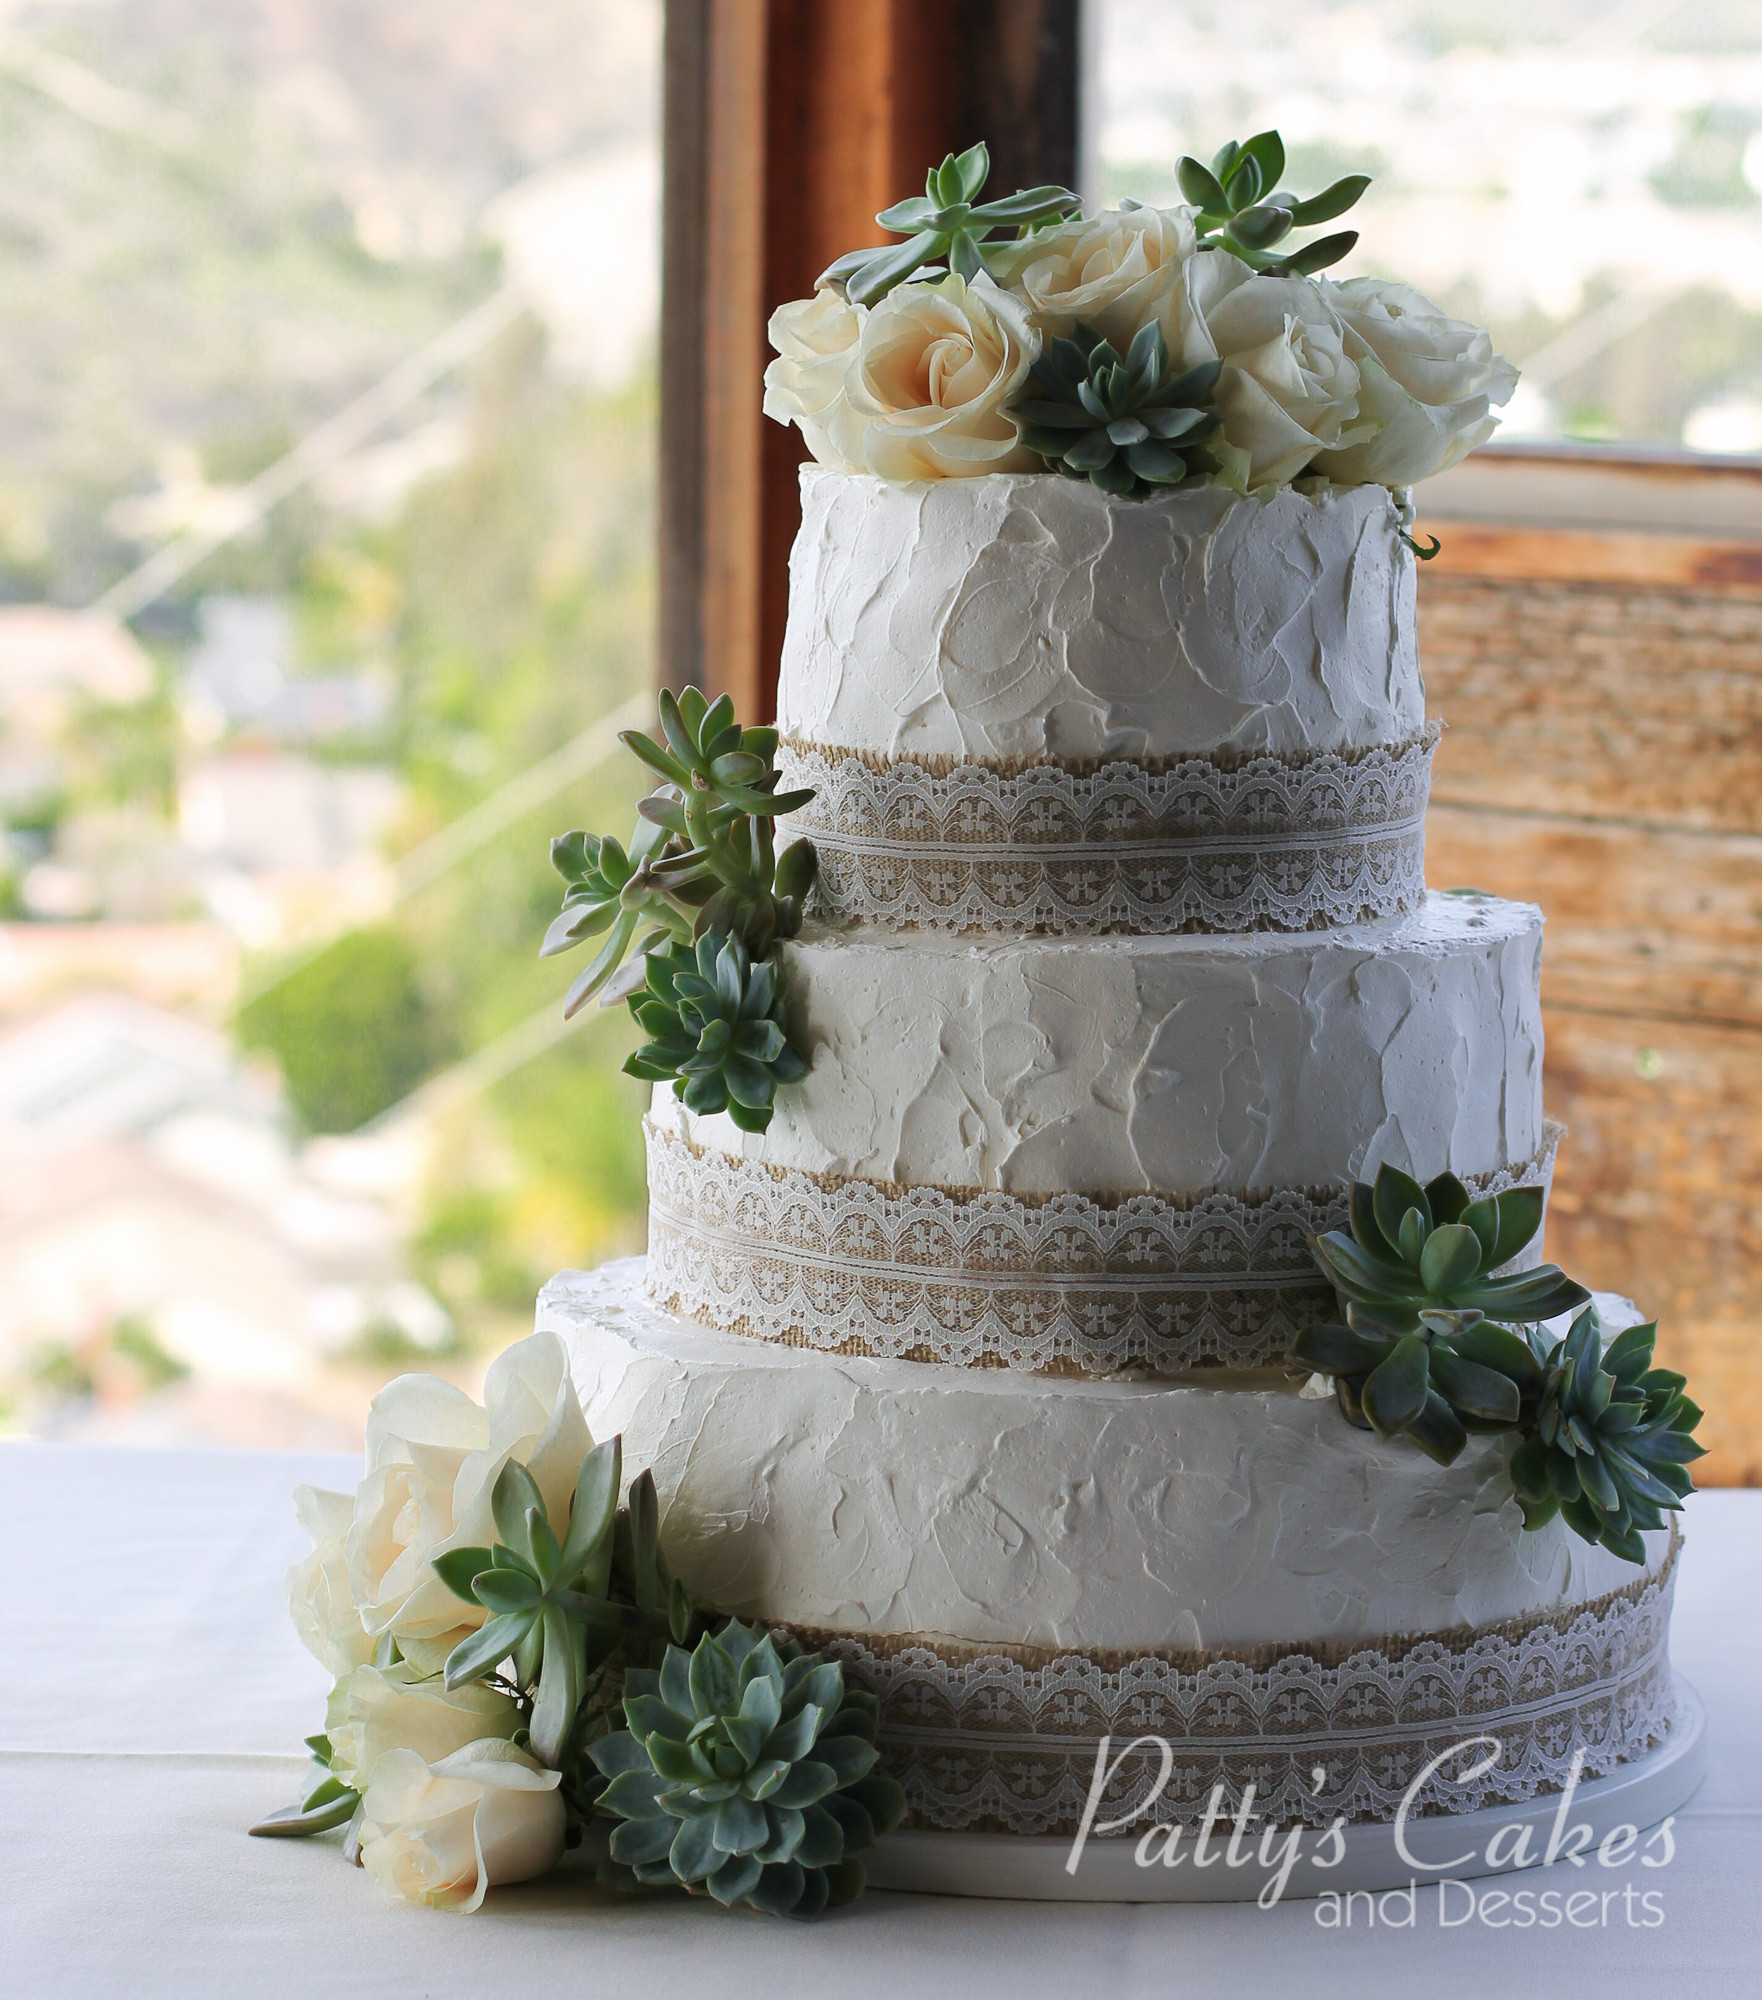 Simple Rustic Wedding Cakes
 of a simple rustic wedding cake Patty s Cakes and